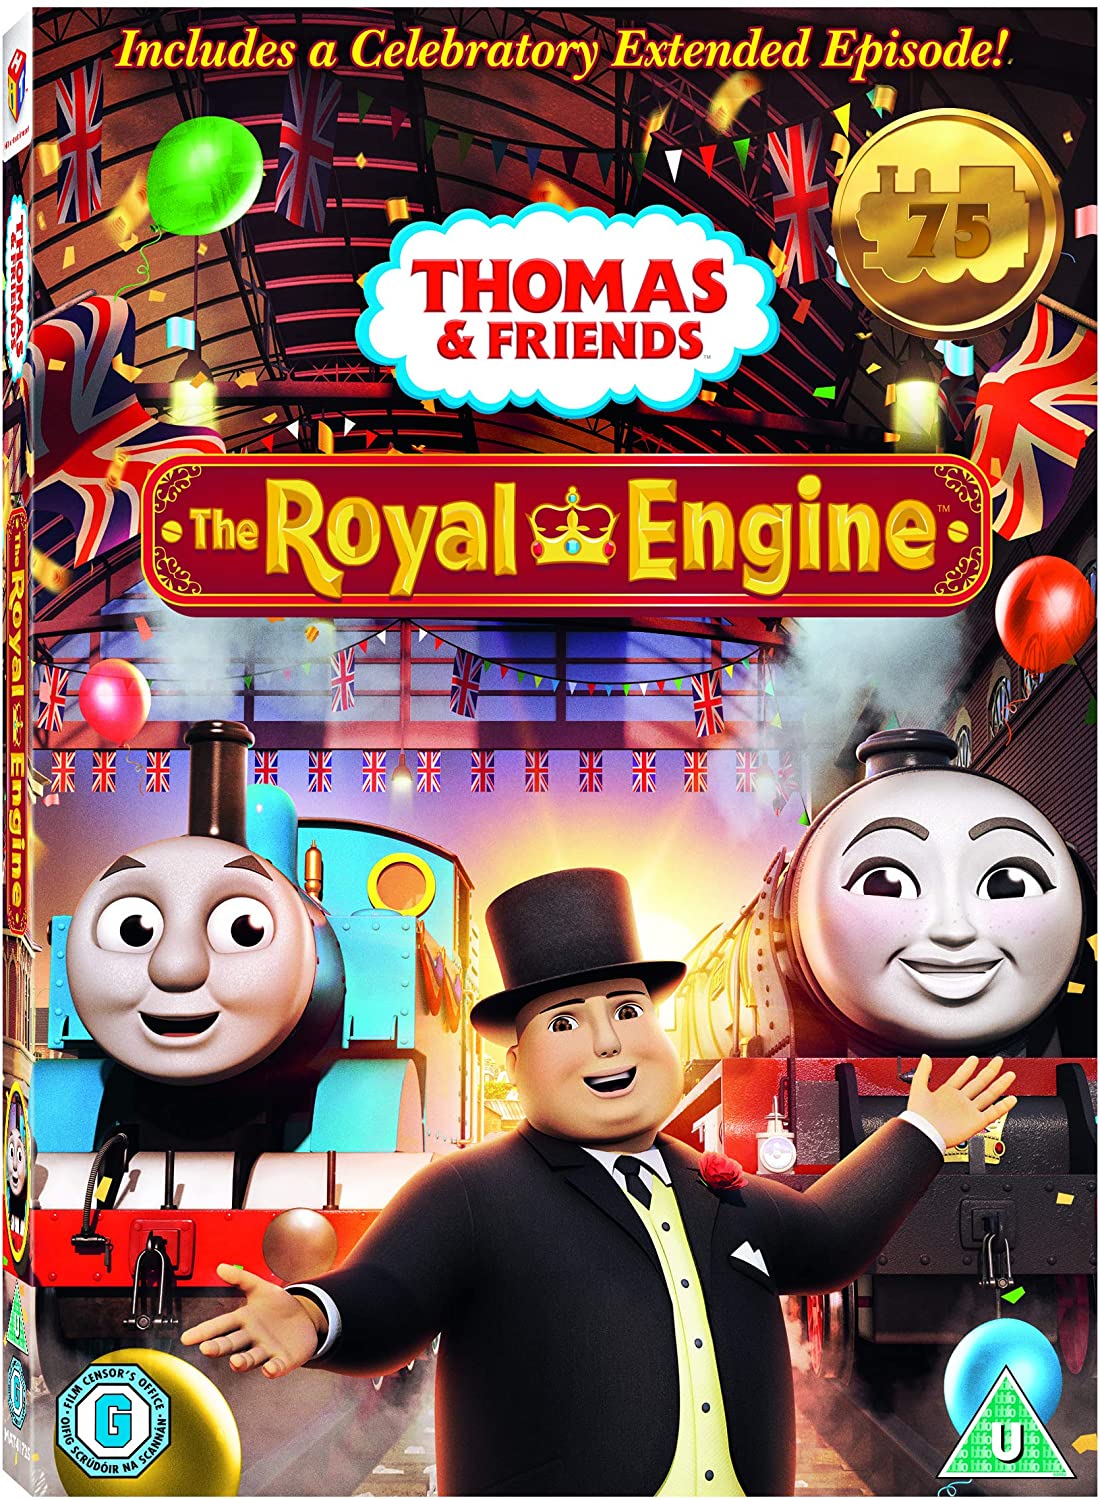 Thomas and friends royal engine 2020